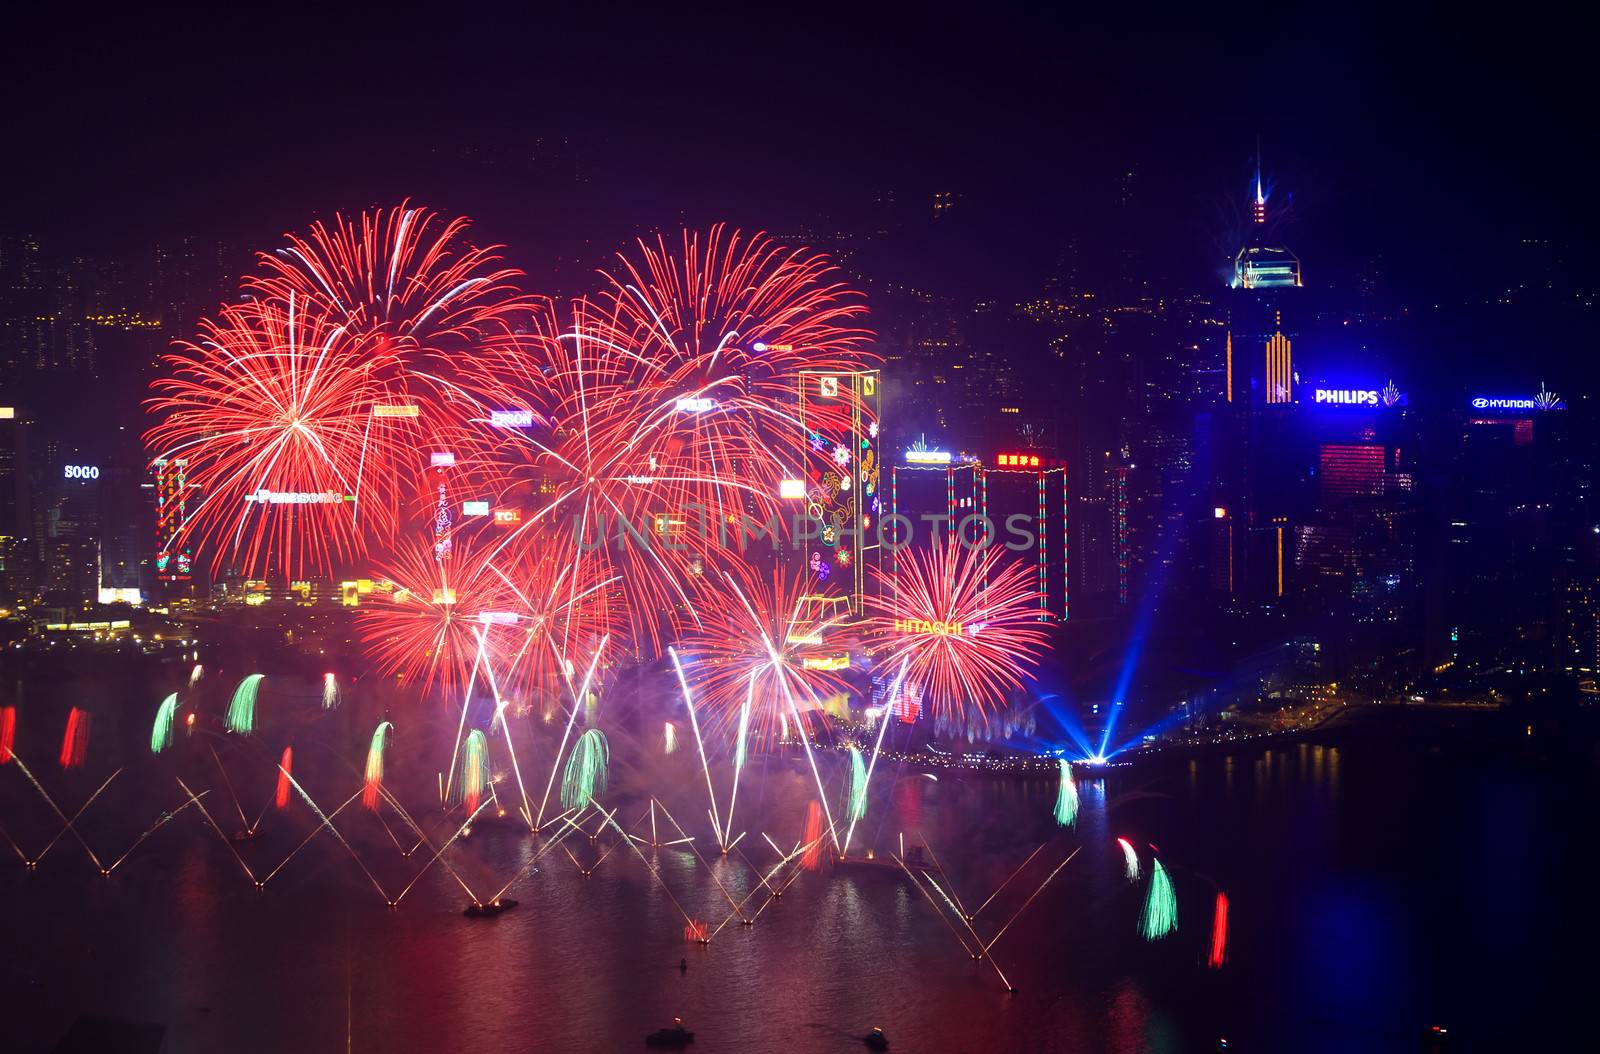 HONG KONG - 1 JANUARY: A splendid firework show and countdown celebration held in Hong Kong on 1 January, 2014. The show lasted for 8 minutes and lighted up the skies above Hong Kong skyscrapers.